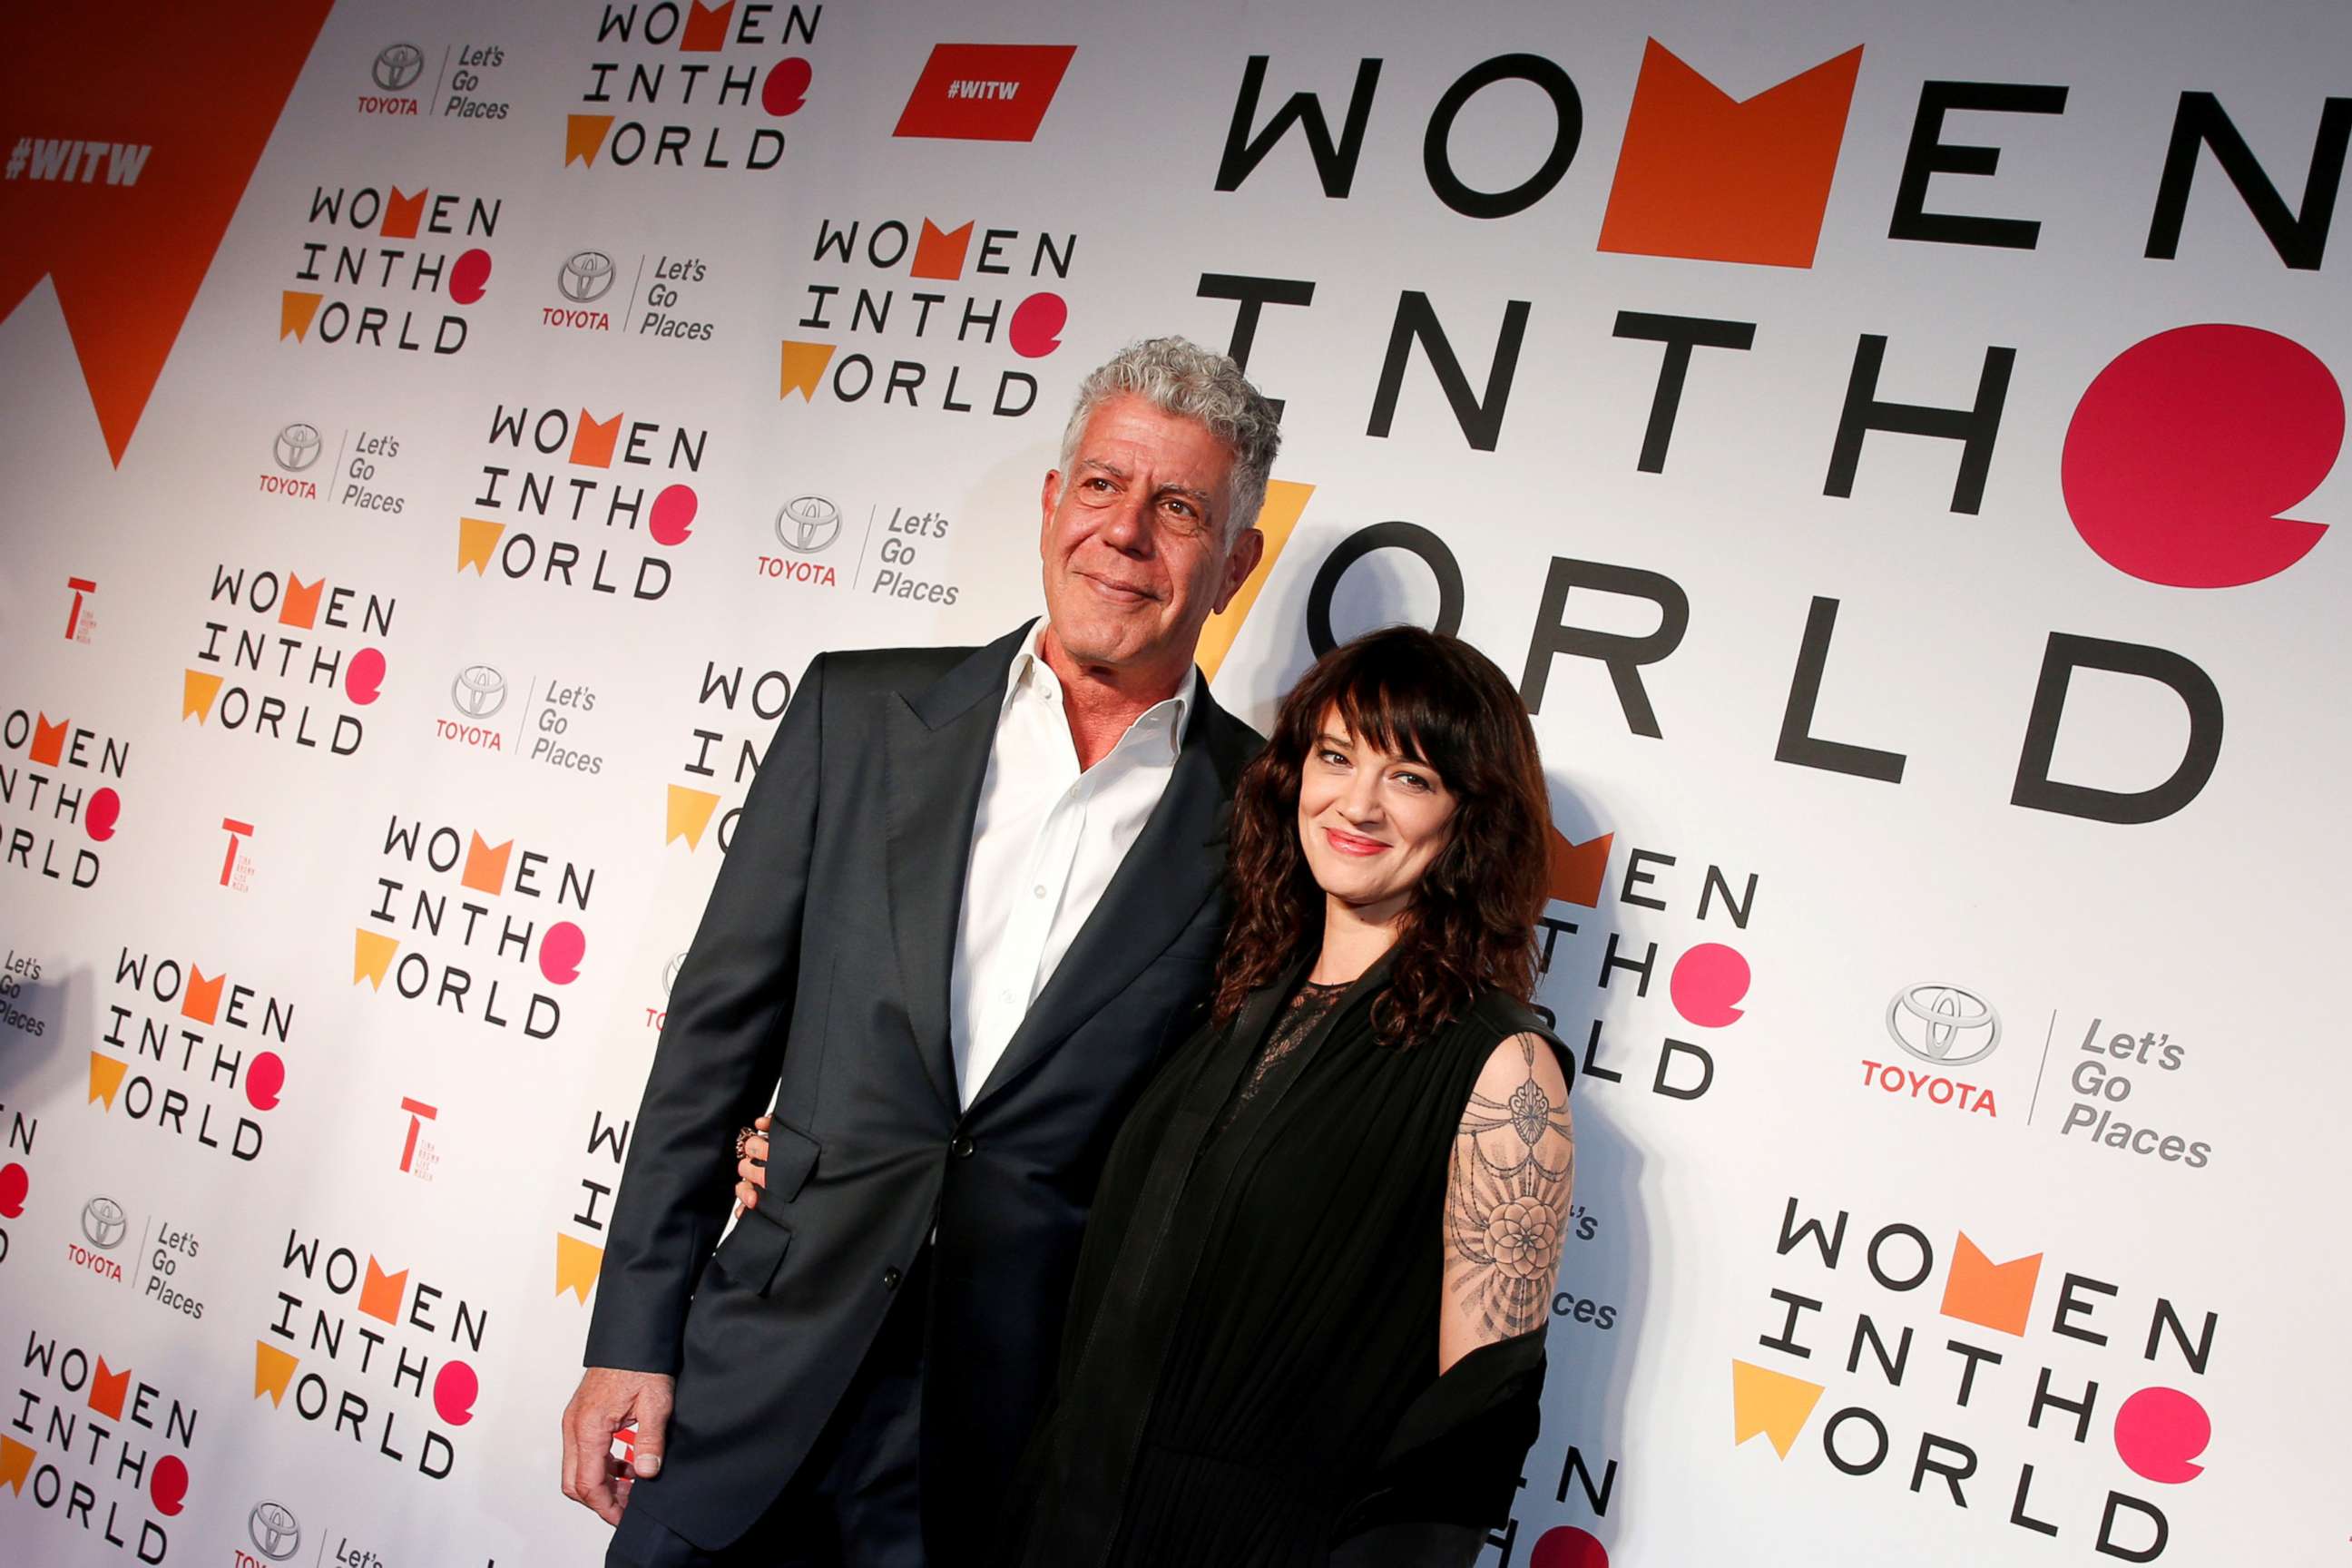 PHOTO: Anthony Bourdain poses with Italian actor and director Asia Argento for the Women In The World Summit in New York, April 12, 2018.